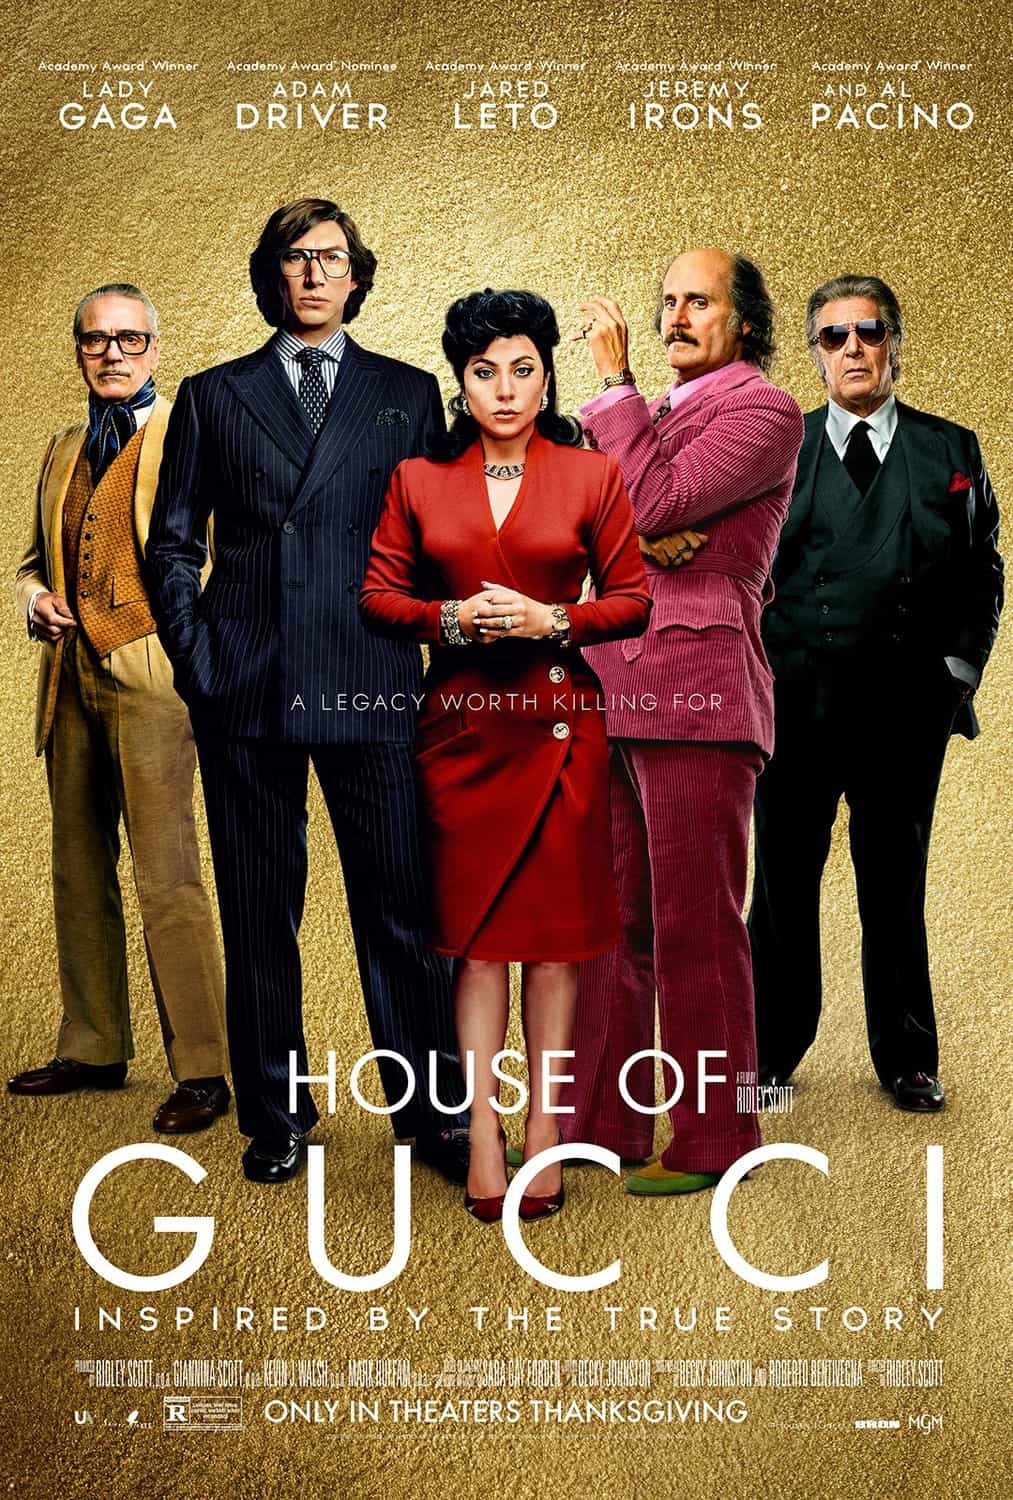 UK Box Office Weekend Report 26th - 28th November 2021:  House of Gucci tops the Uk box office on its debut with Encanto debuting at 3